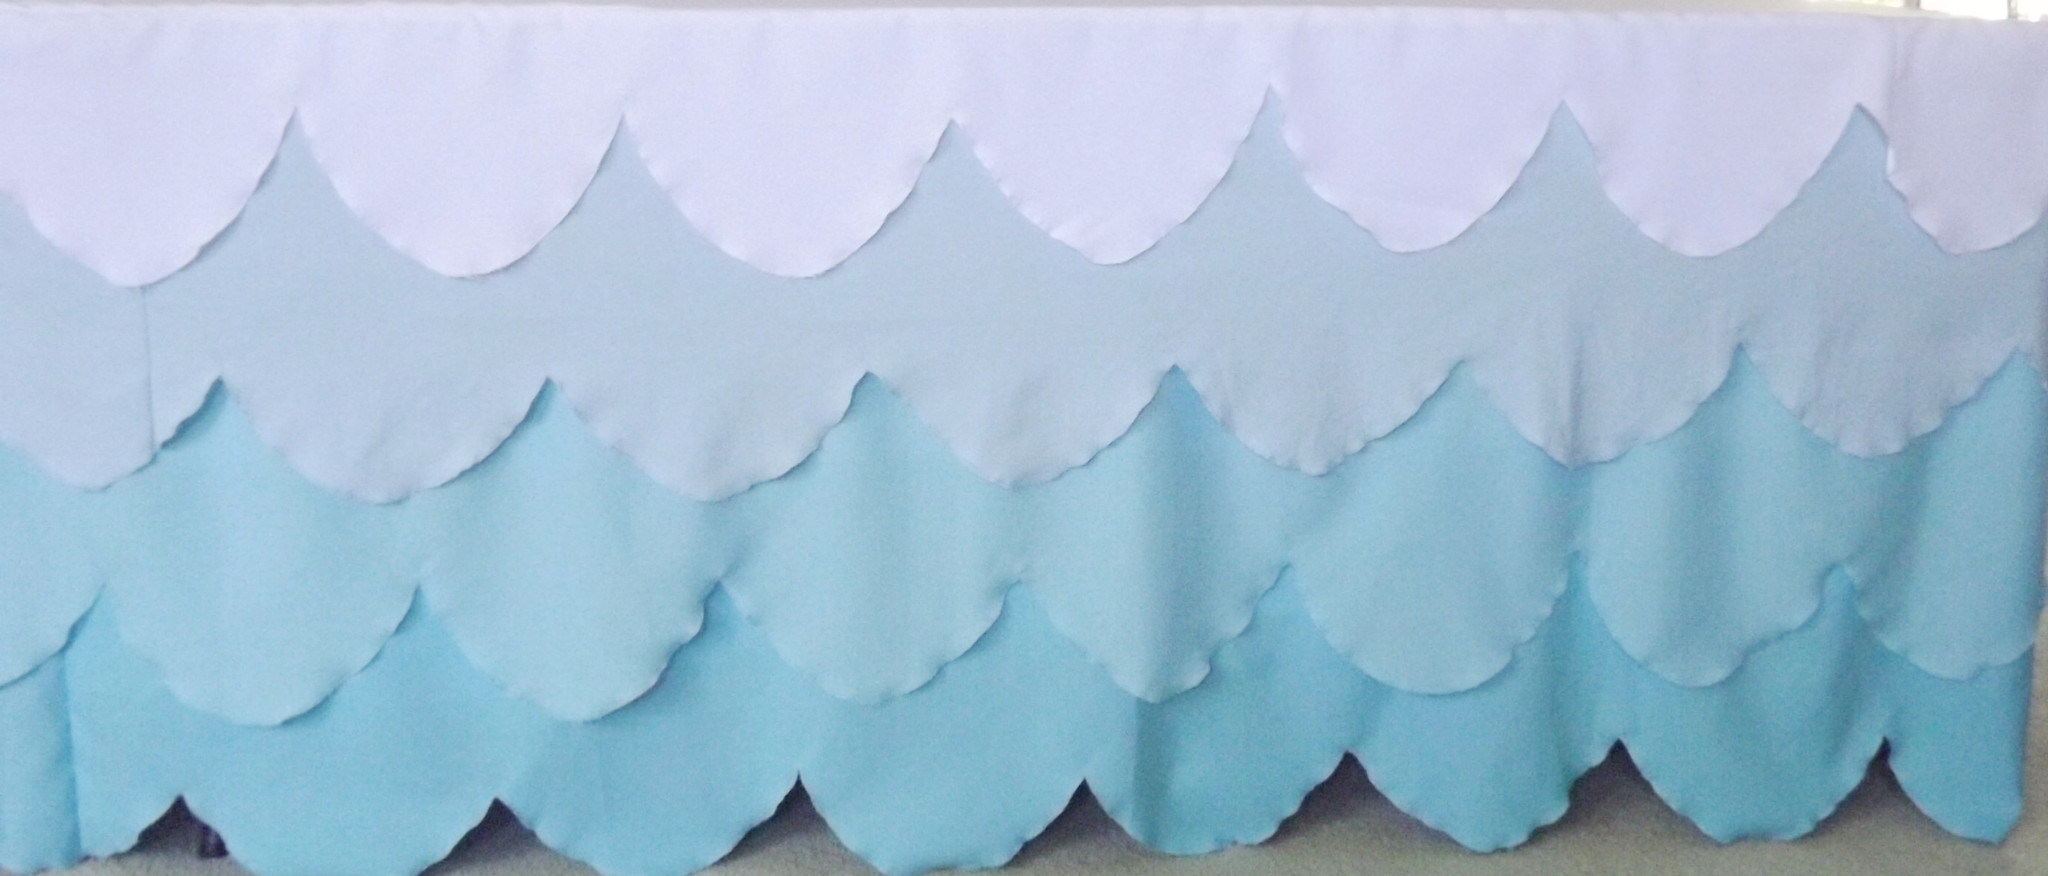 Aqua ombre tablecloth for hire or purchase - Saffy and May (Qld)